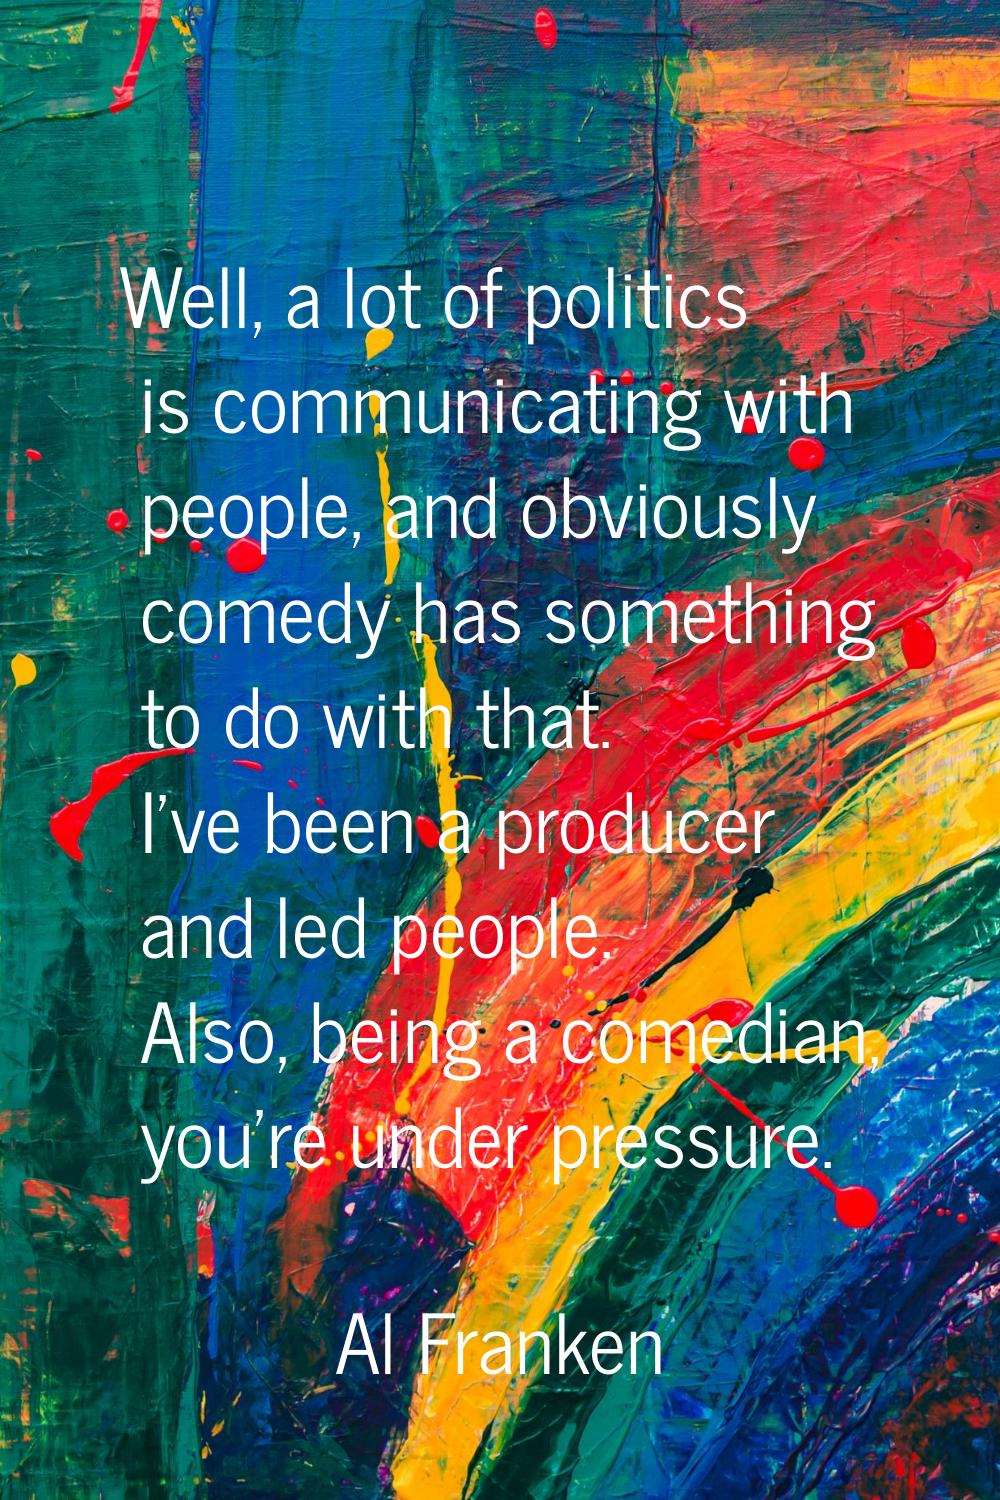 Well, a lot of politics is communicating with people, and obviously comedy has something to do with